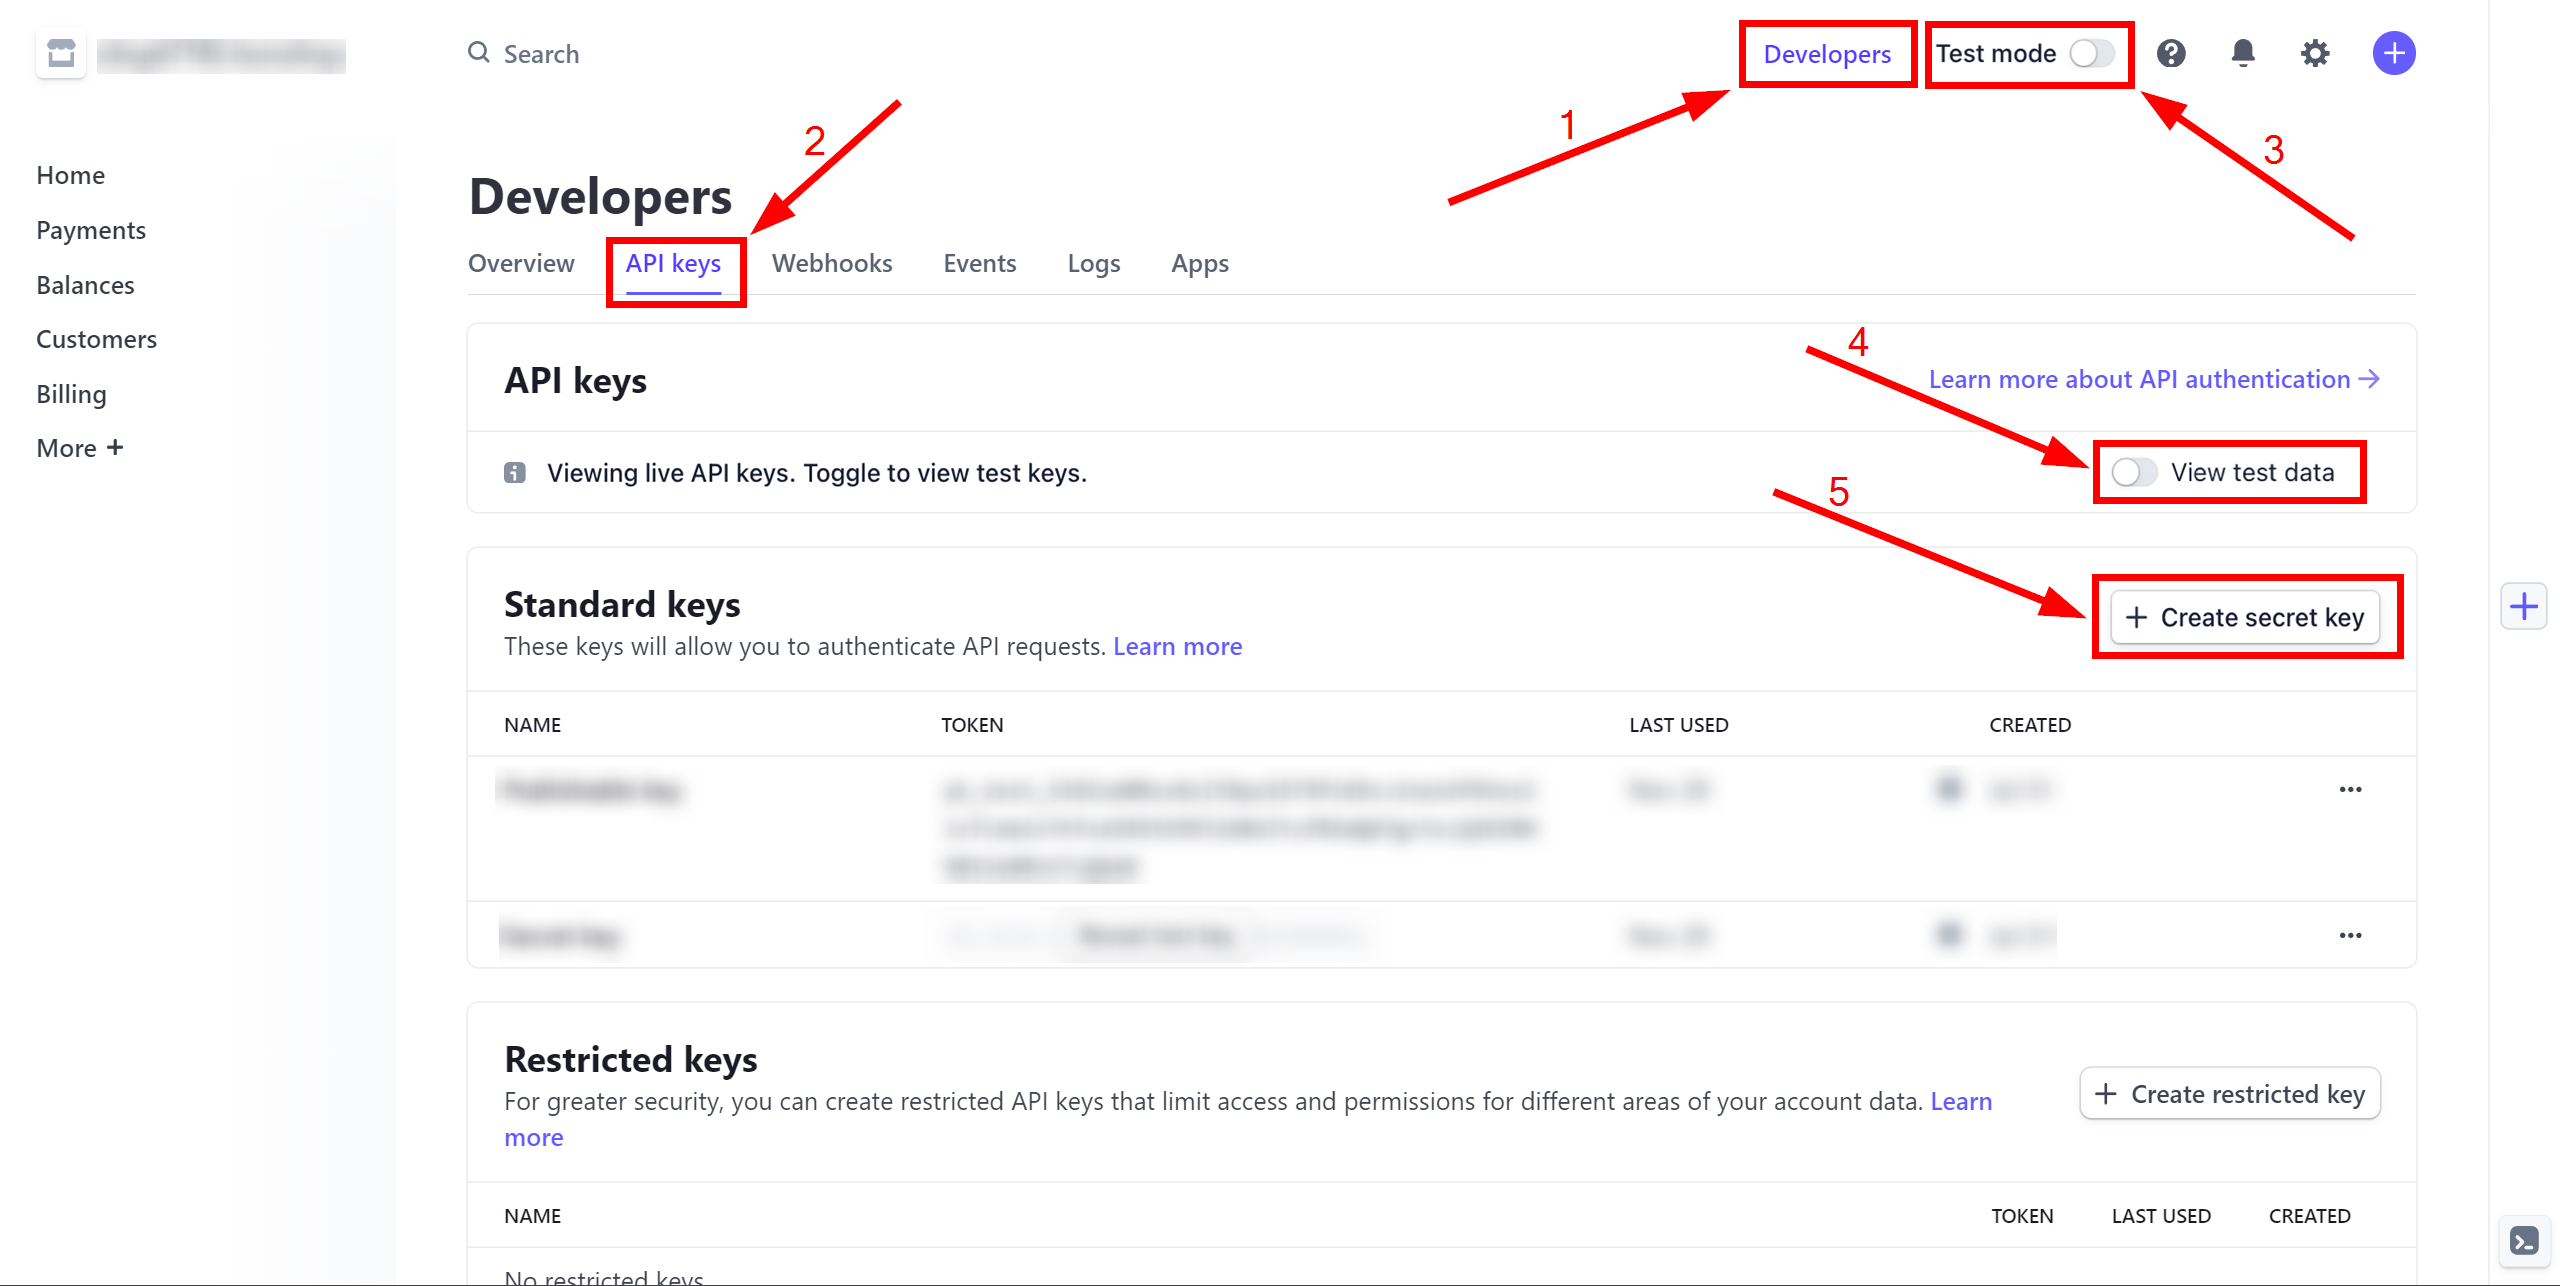 How to Connect Stripe as Data Destination | Disabling "Test mode" and "View test data"